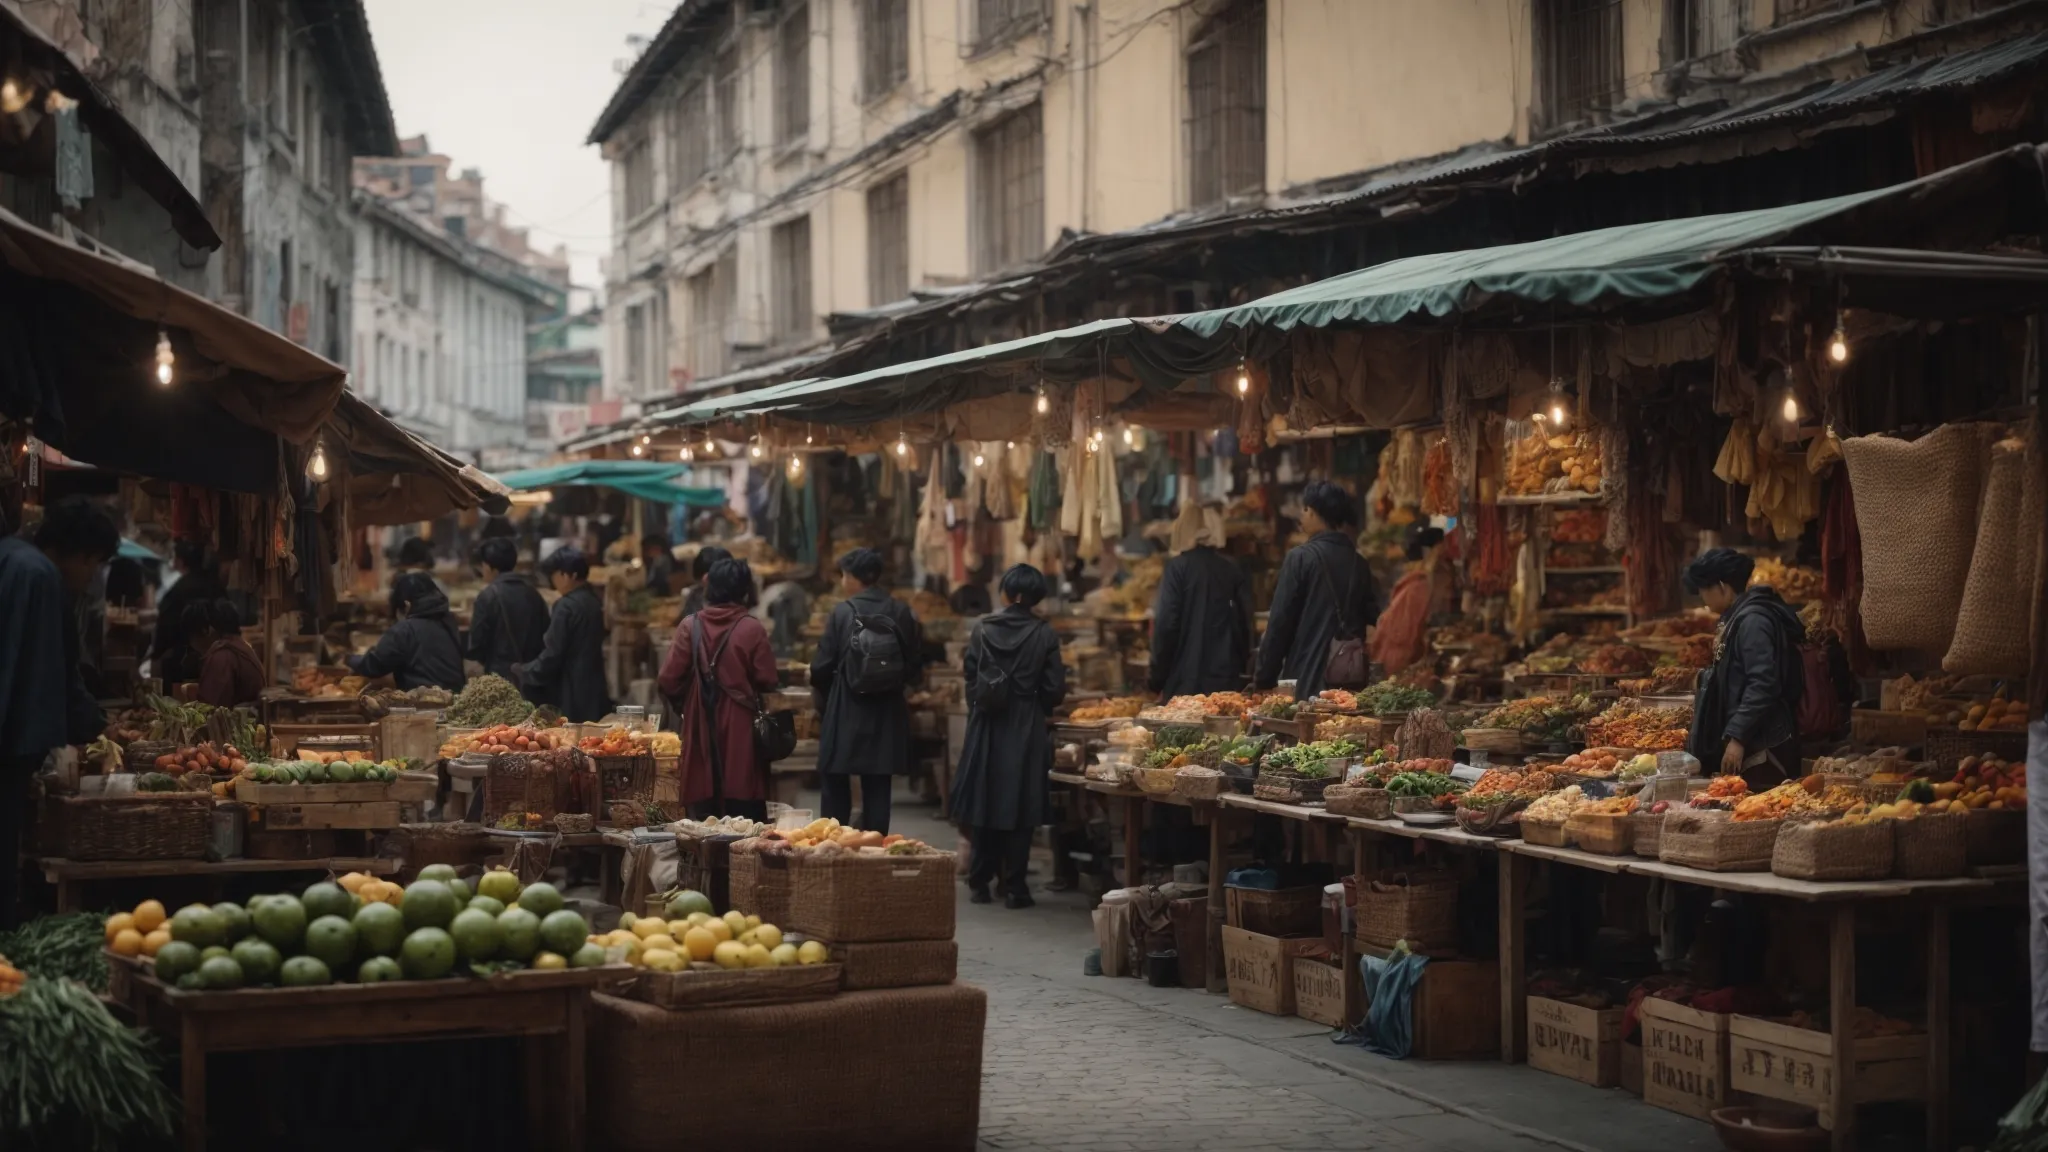 a bustling street market with eclectic stalls offering unique artisanal goods.